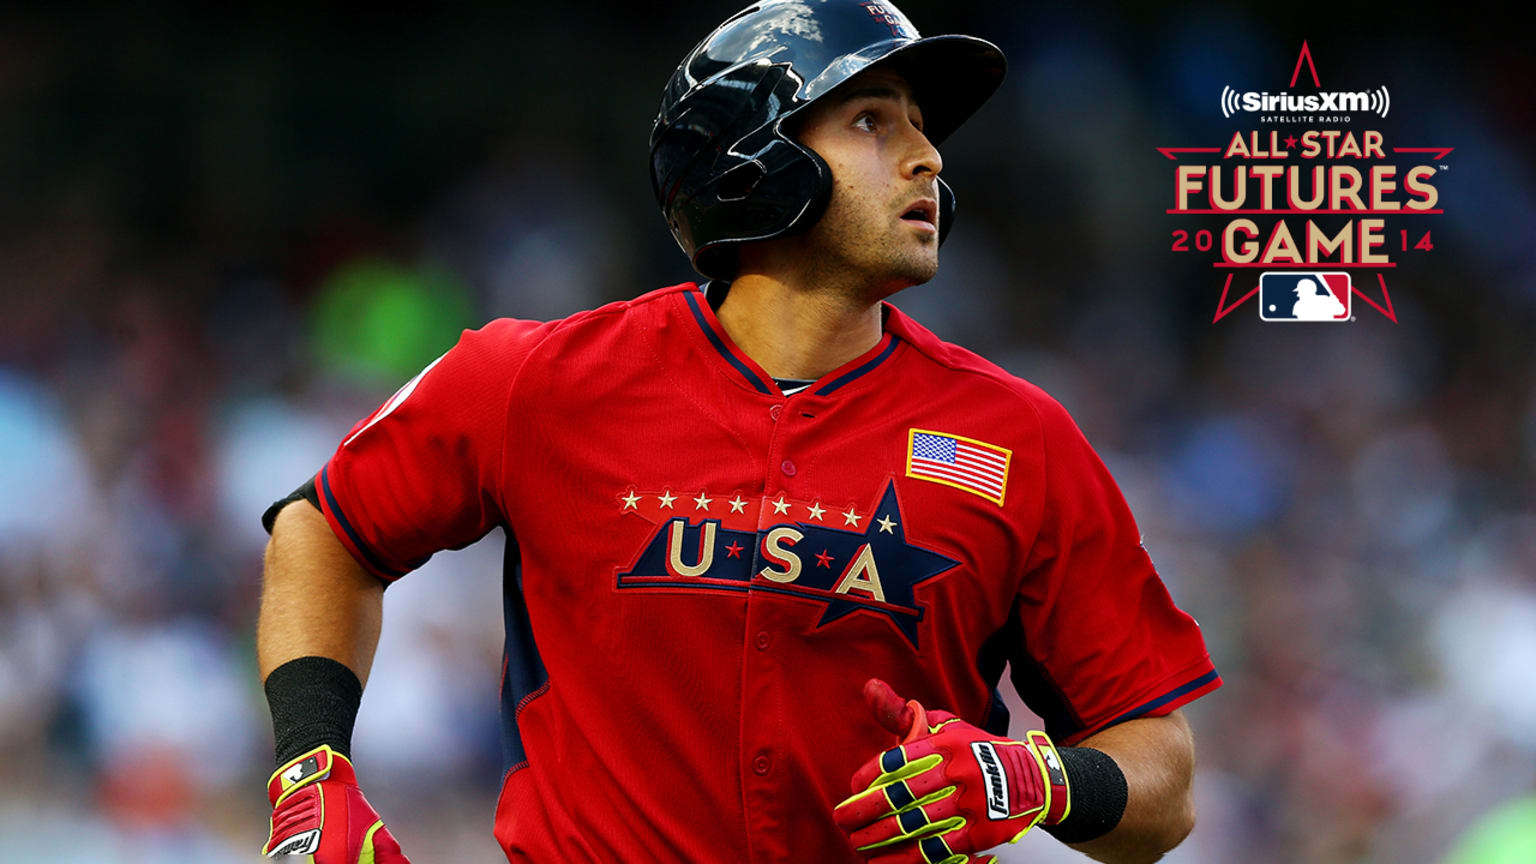 2014 MLB Futures Game roster review: International Team - Minor